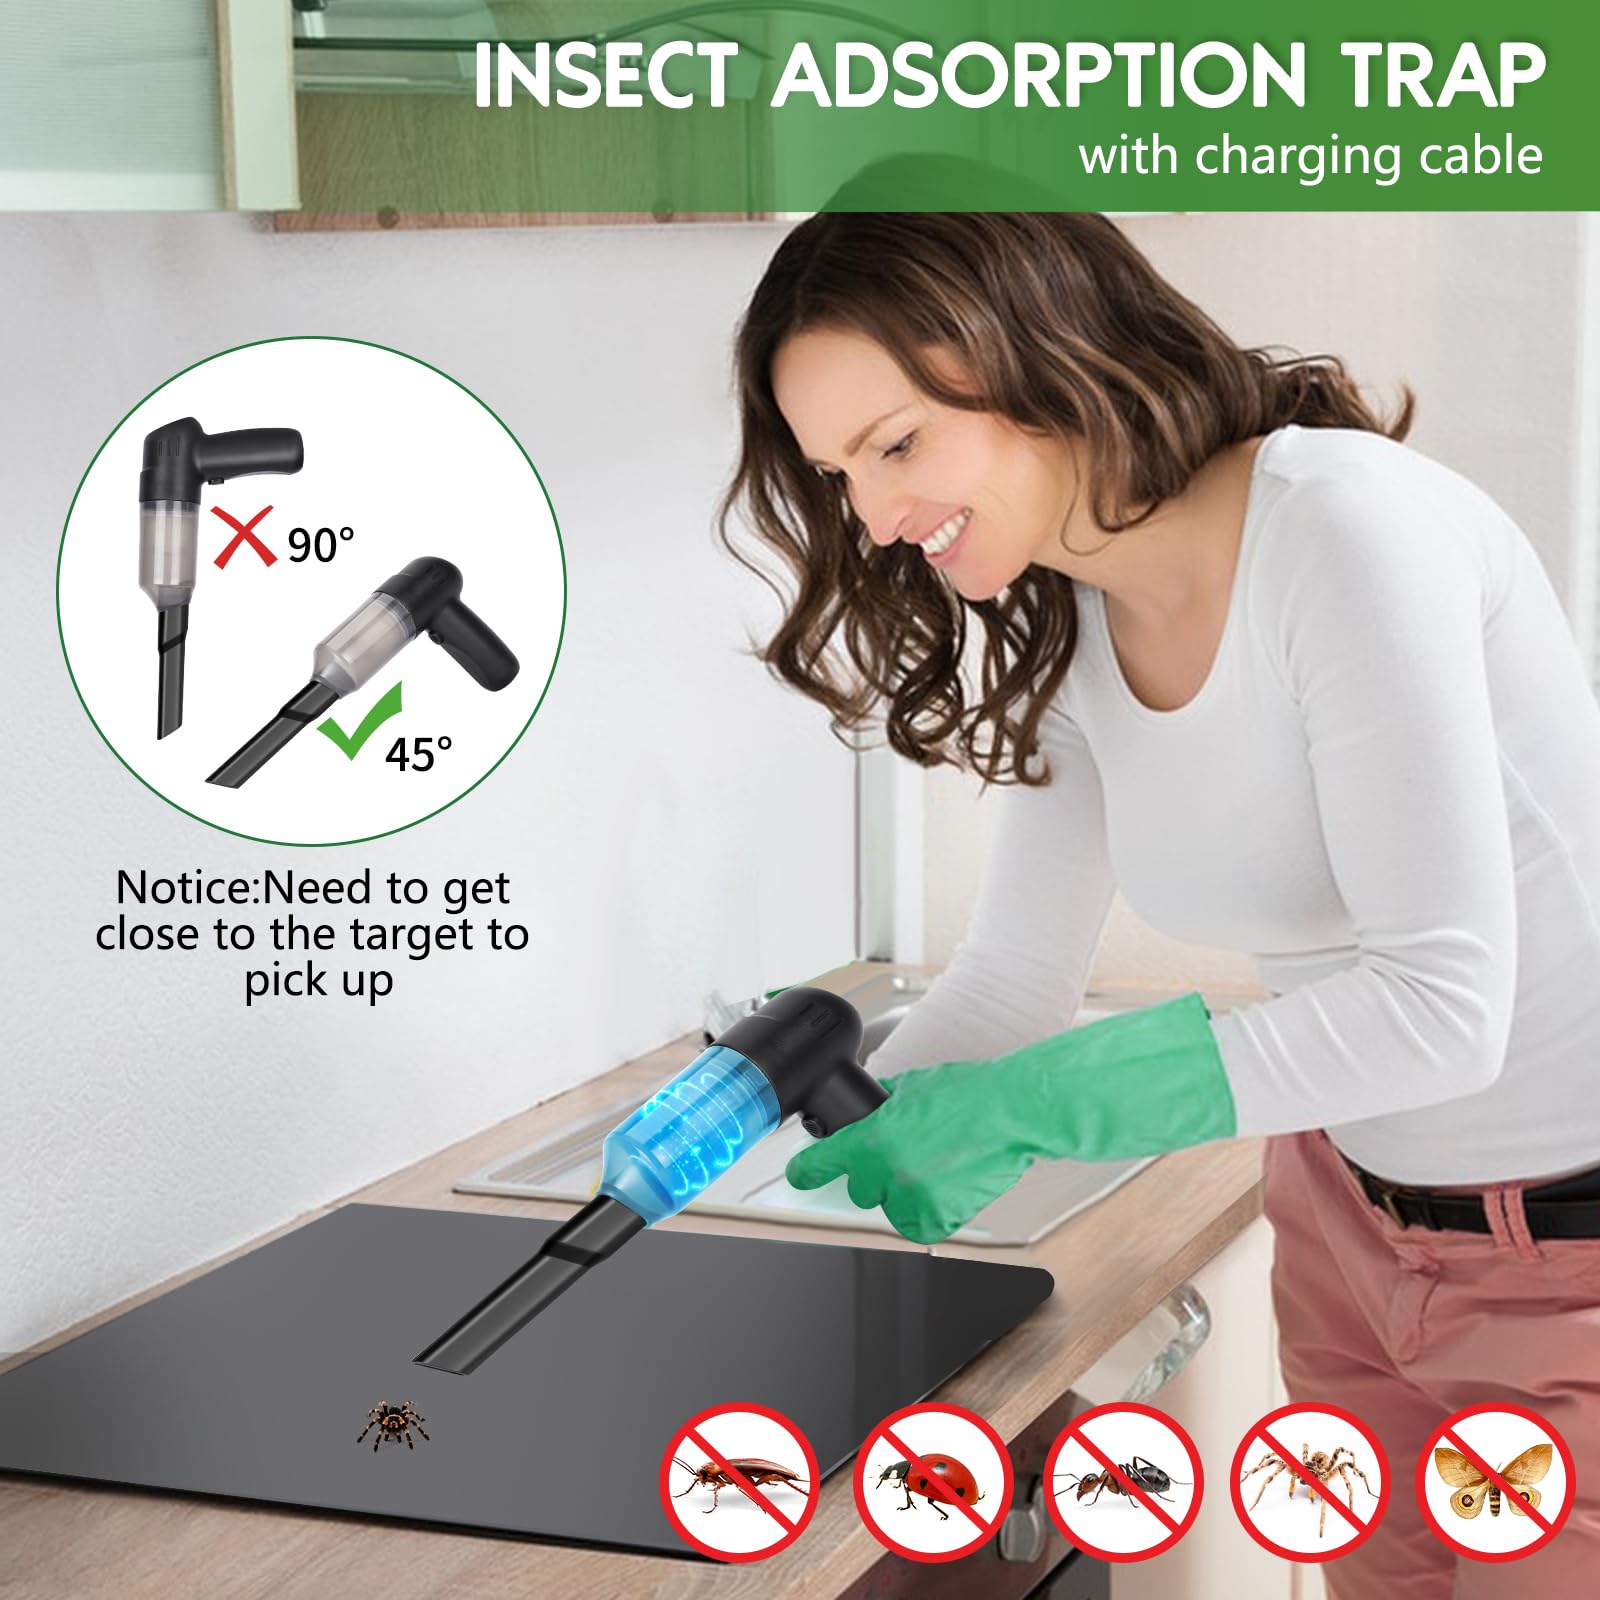 Vacuum Bug Catcher Spider and Inspect Traps Catcher with USB Rechargeable Battery Bug Pest Control, Inspections and Handheld Bug Catcher with Brush Head Fluke for Stink Bug, Beer, Pest Suction Trap